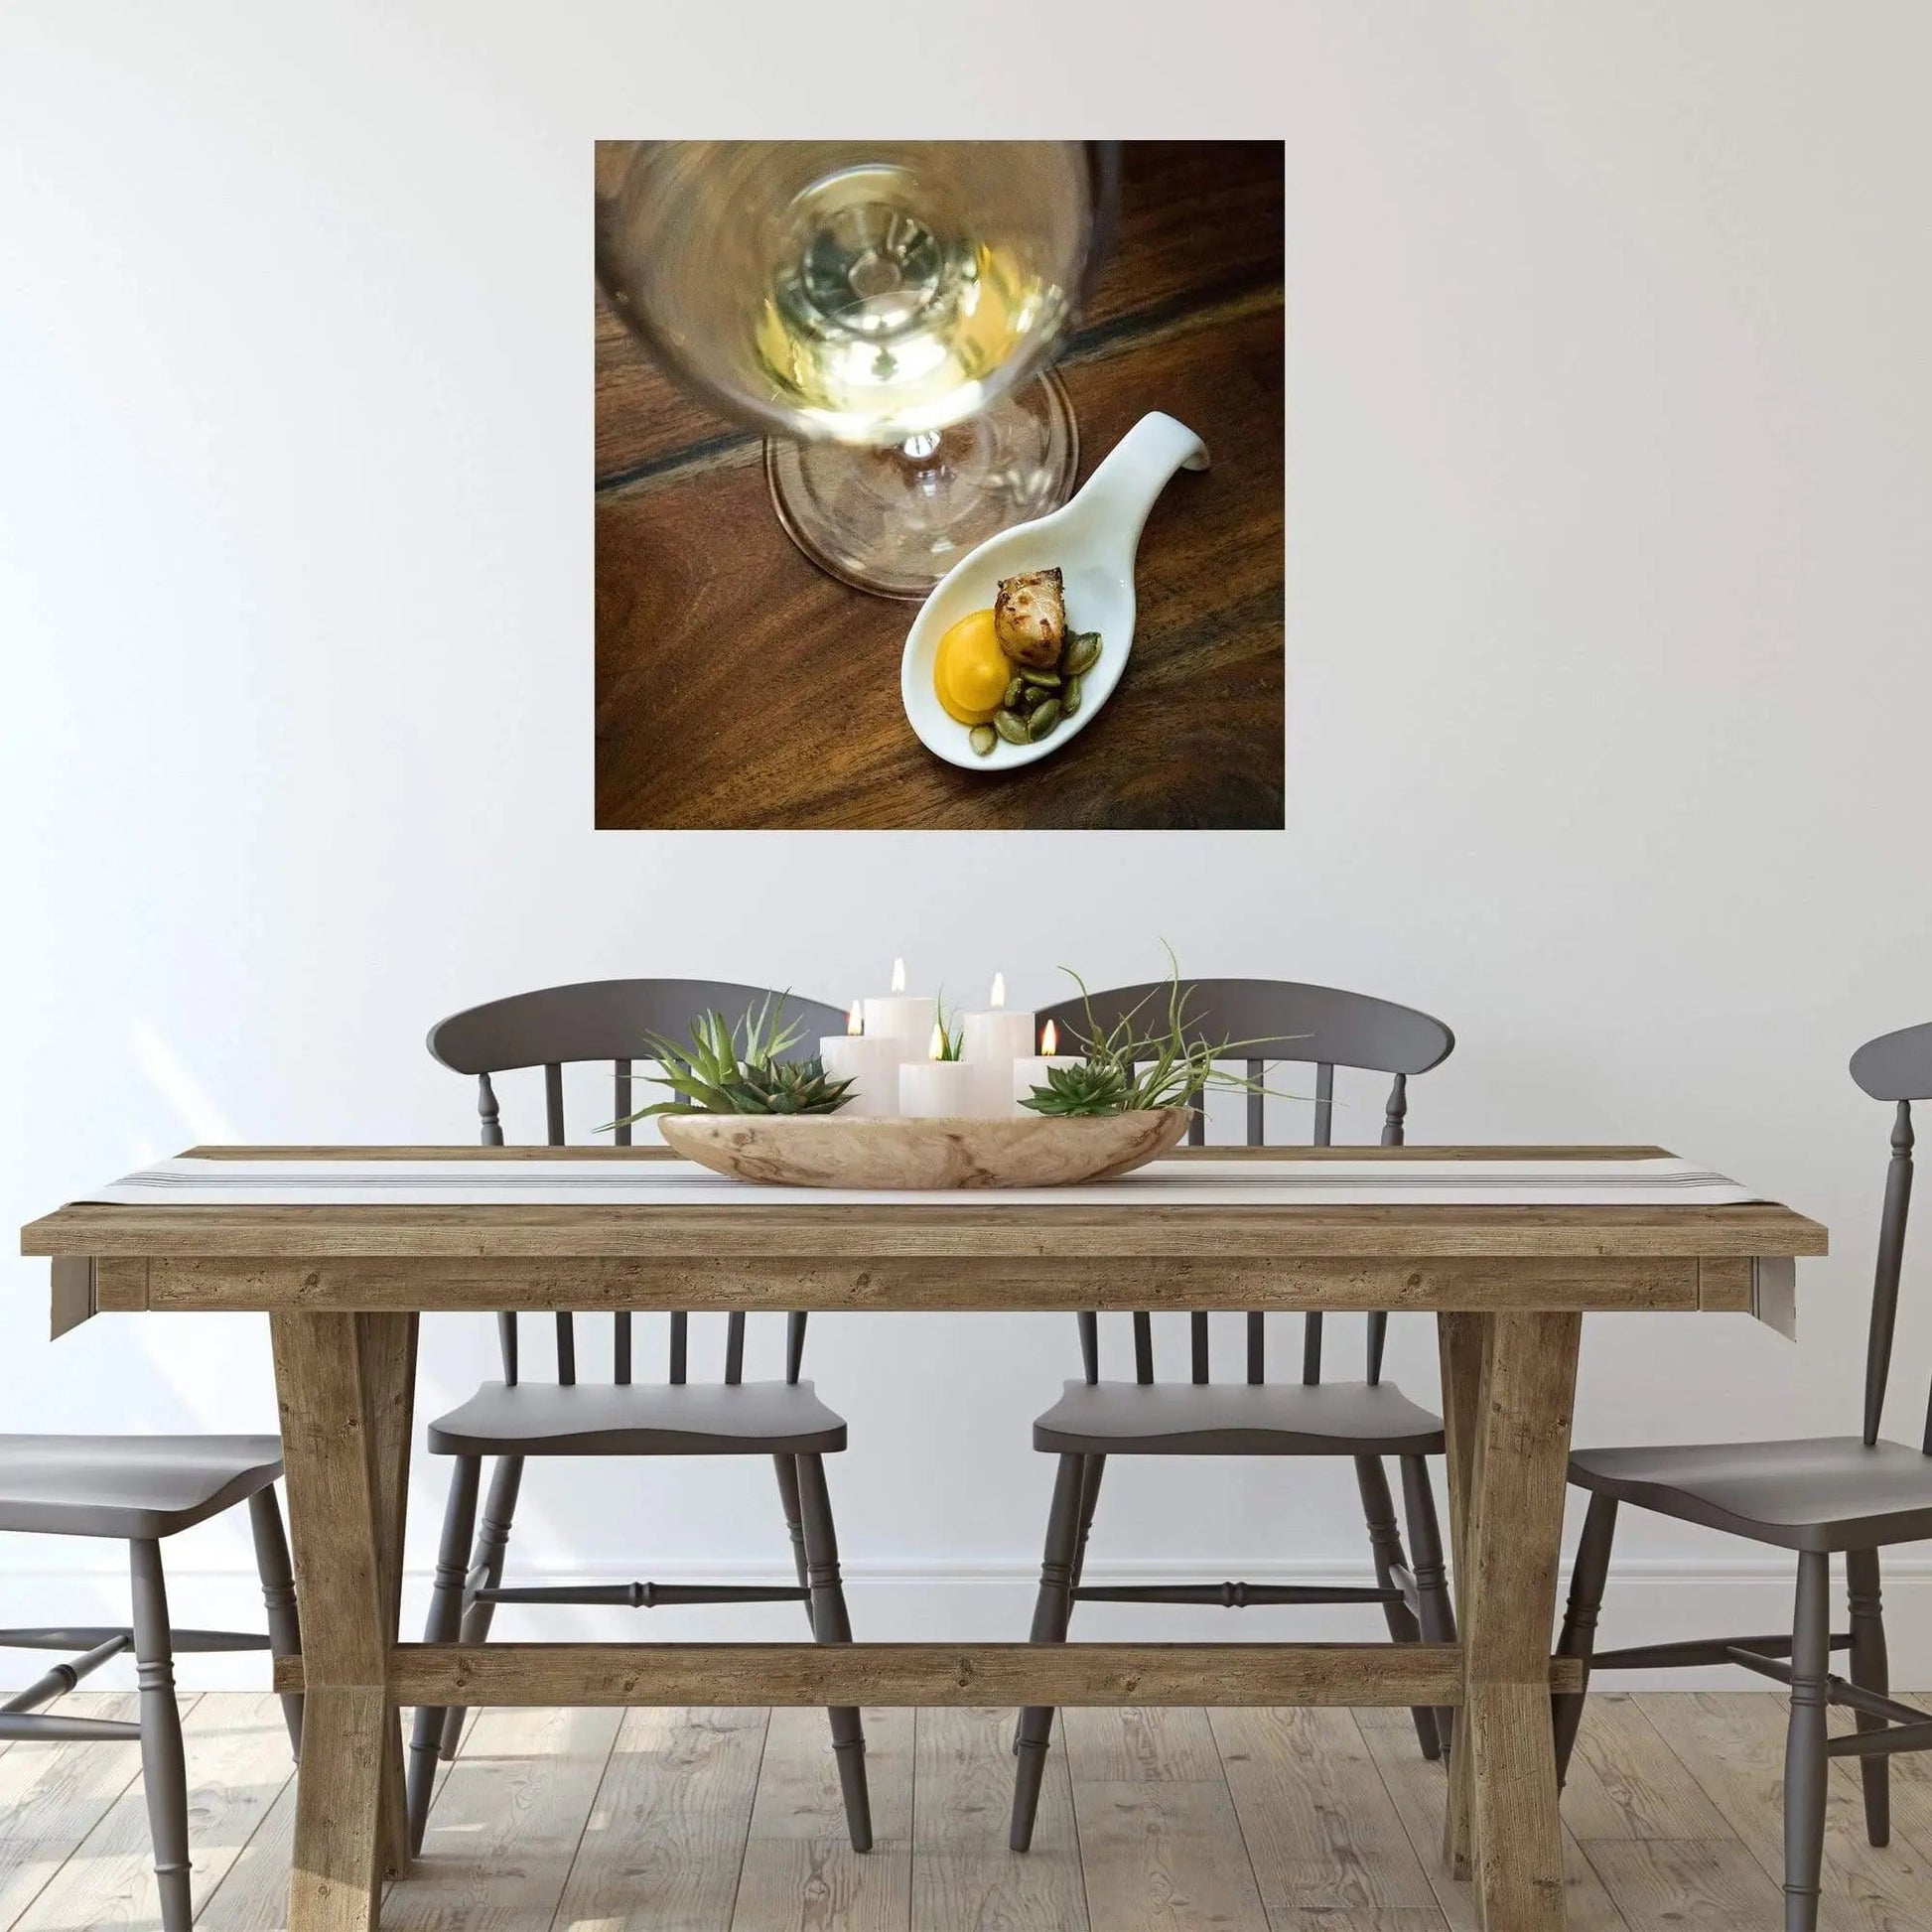 Pairing Nicely chardonnay food wine and food square print by Lisa Blount room view